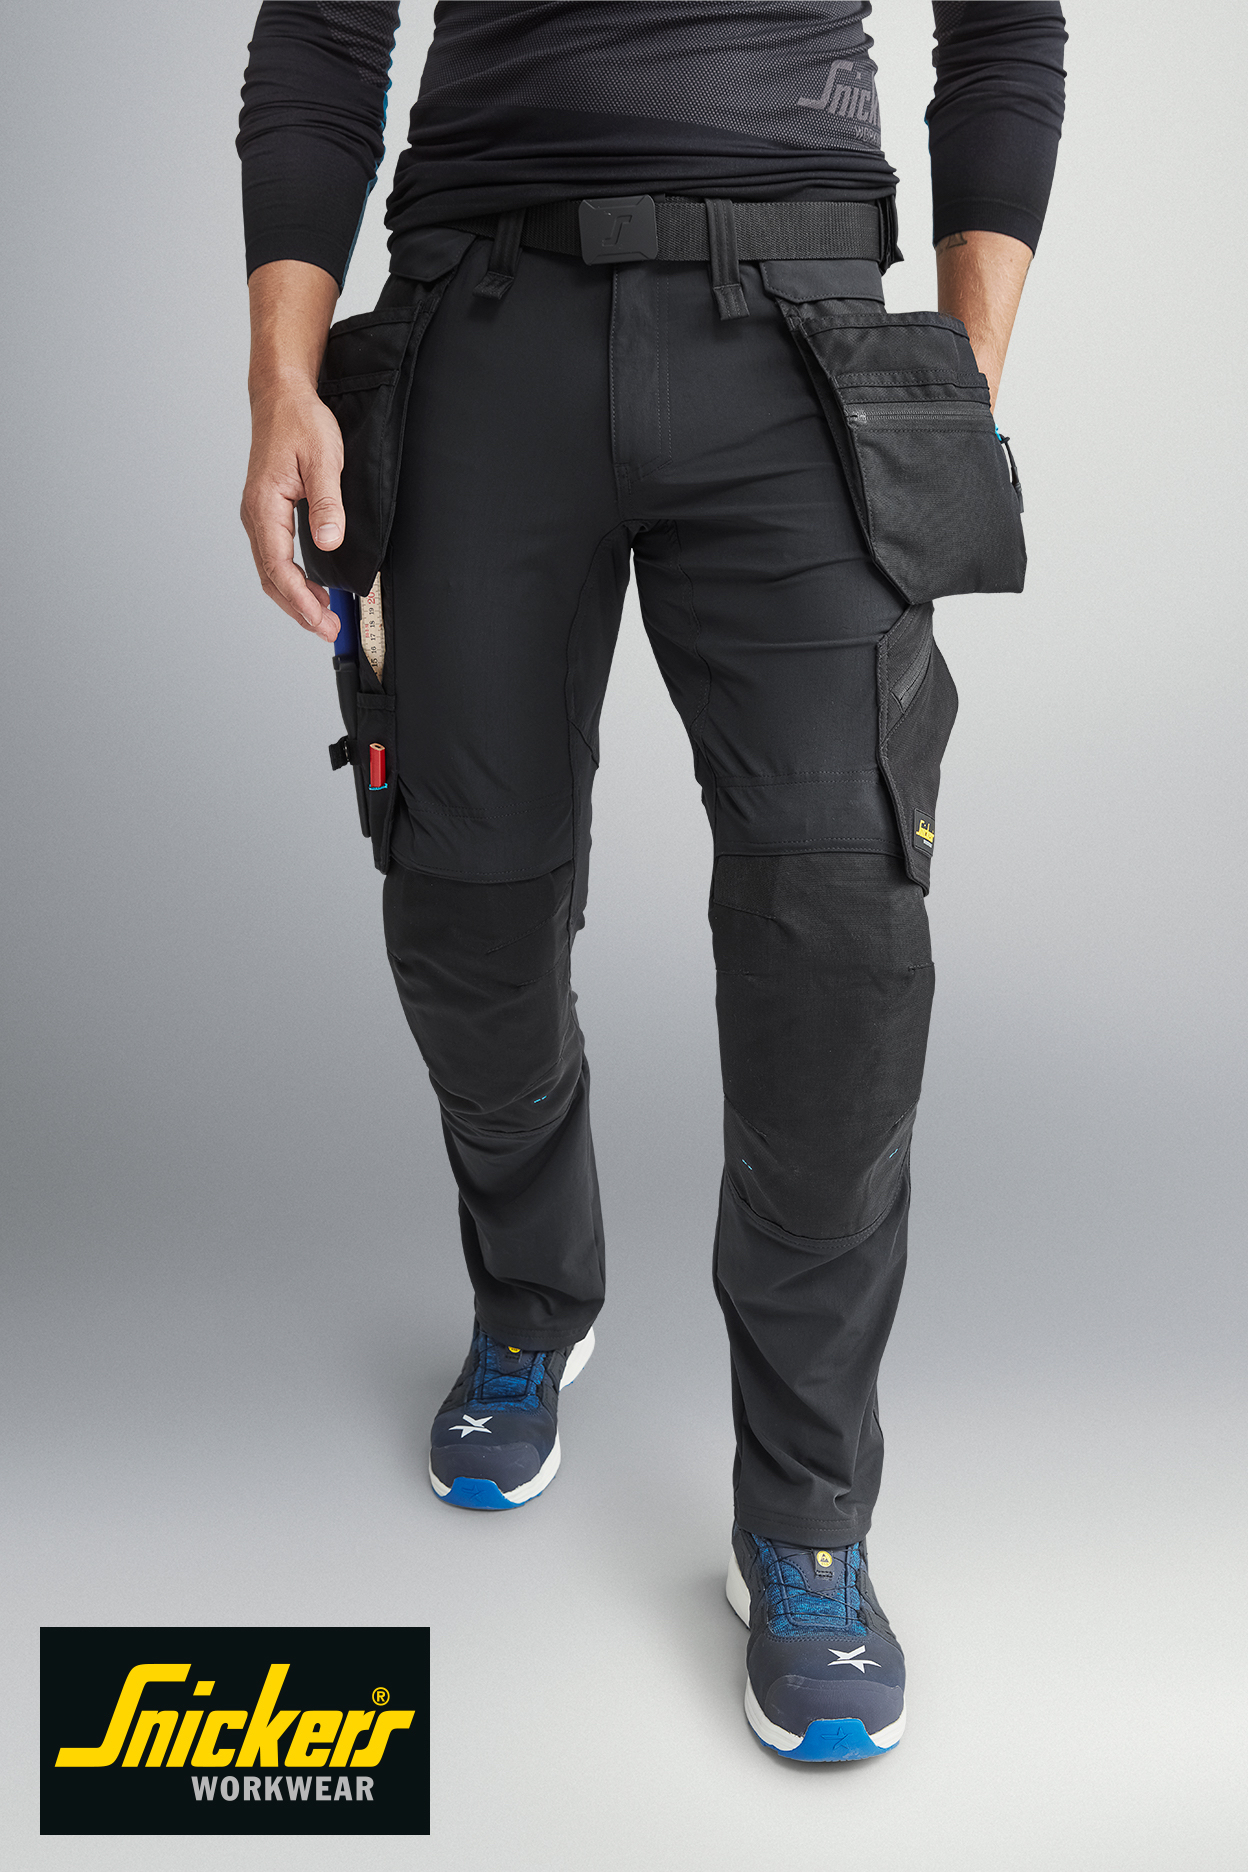 Detachable Holster Pockets In Snickers’ New LiteWork Stretch Trousers